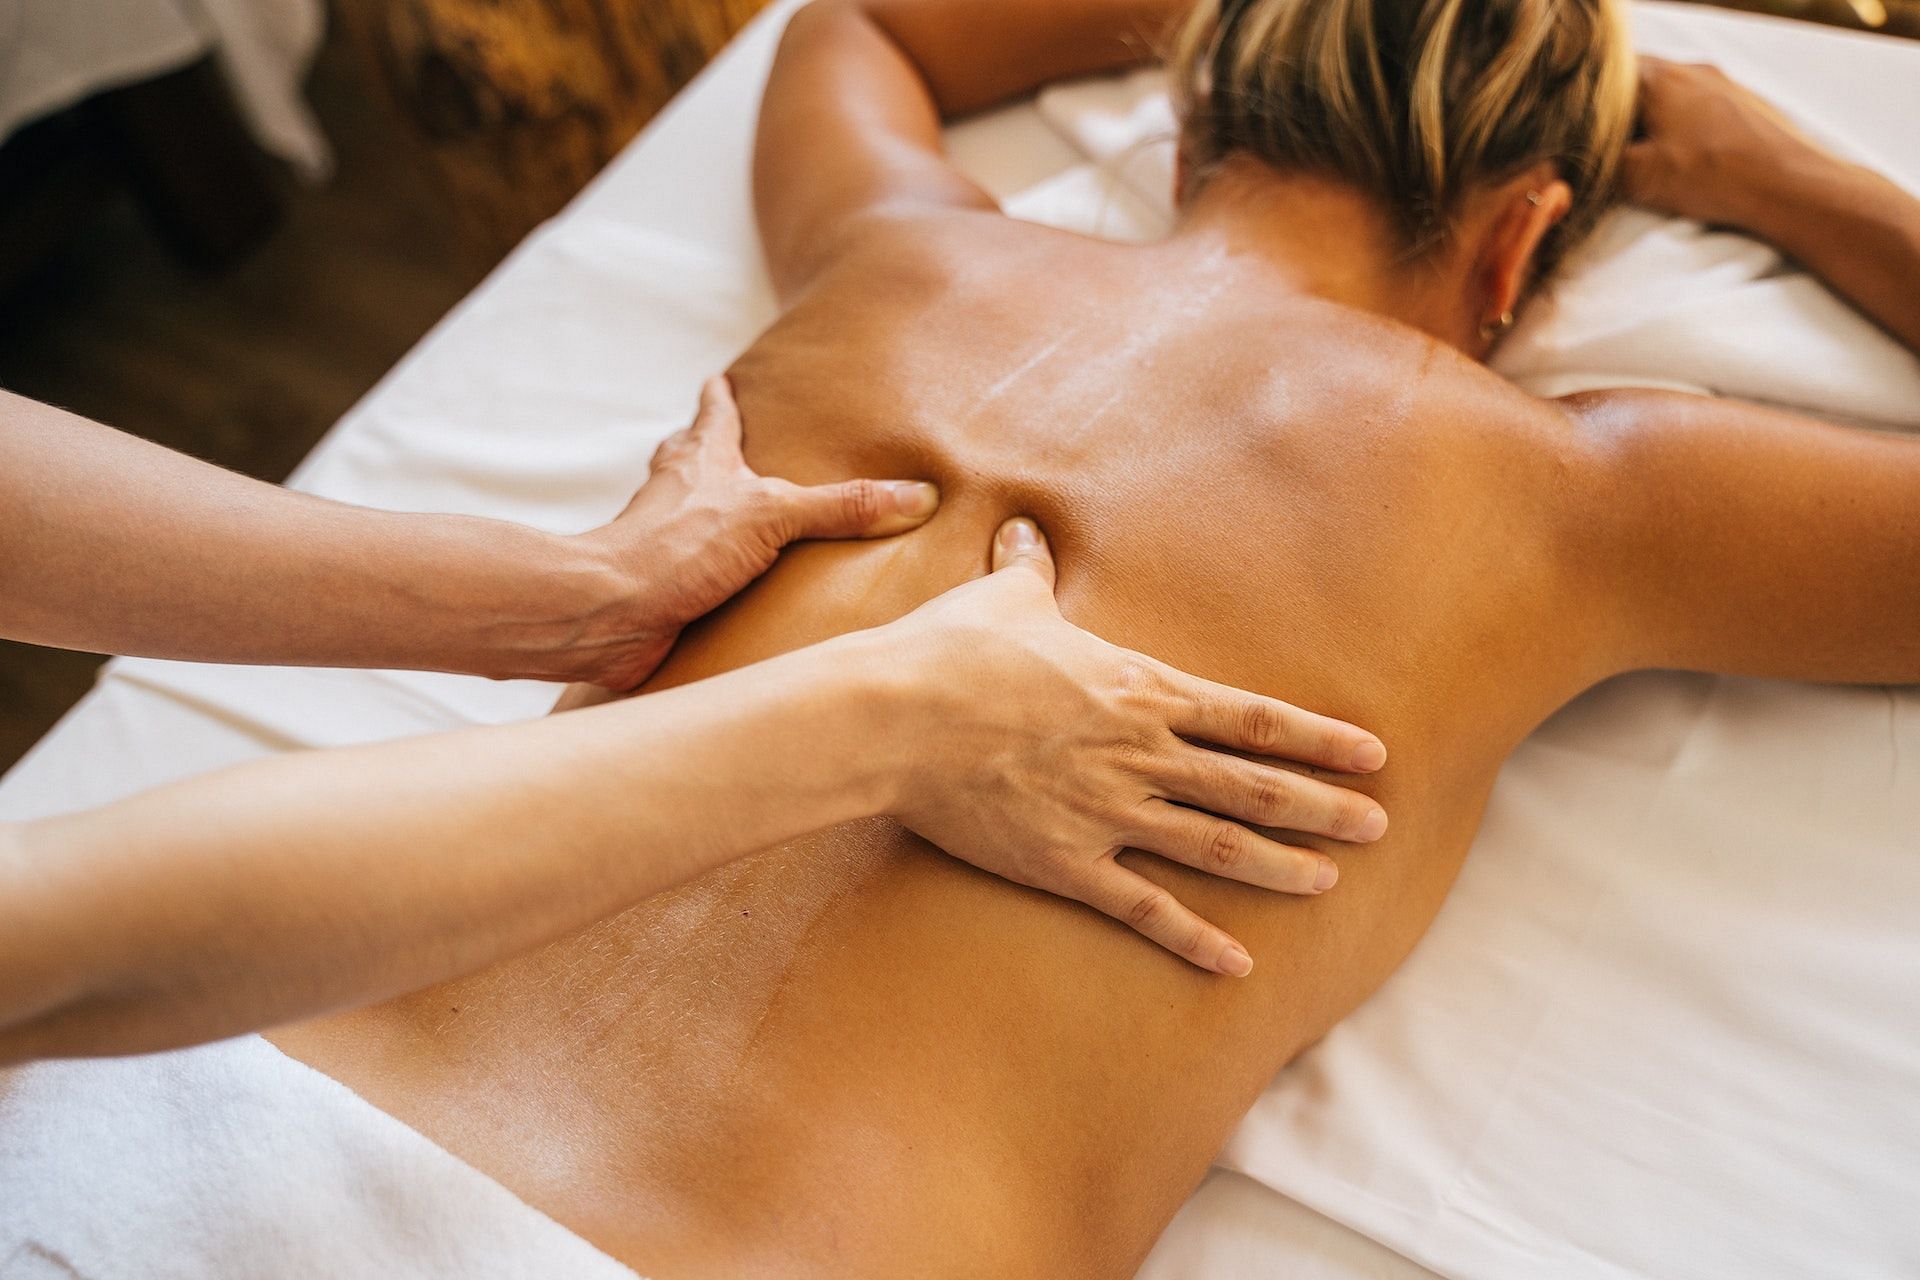 Massage can ease pain and inflammation. (Photo via Pexels/Anna Tarazevich)